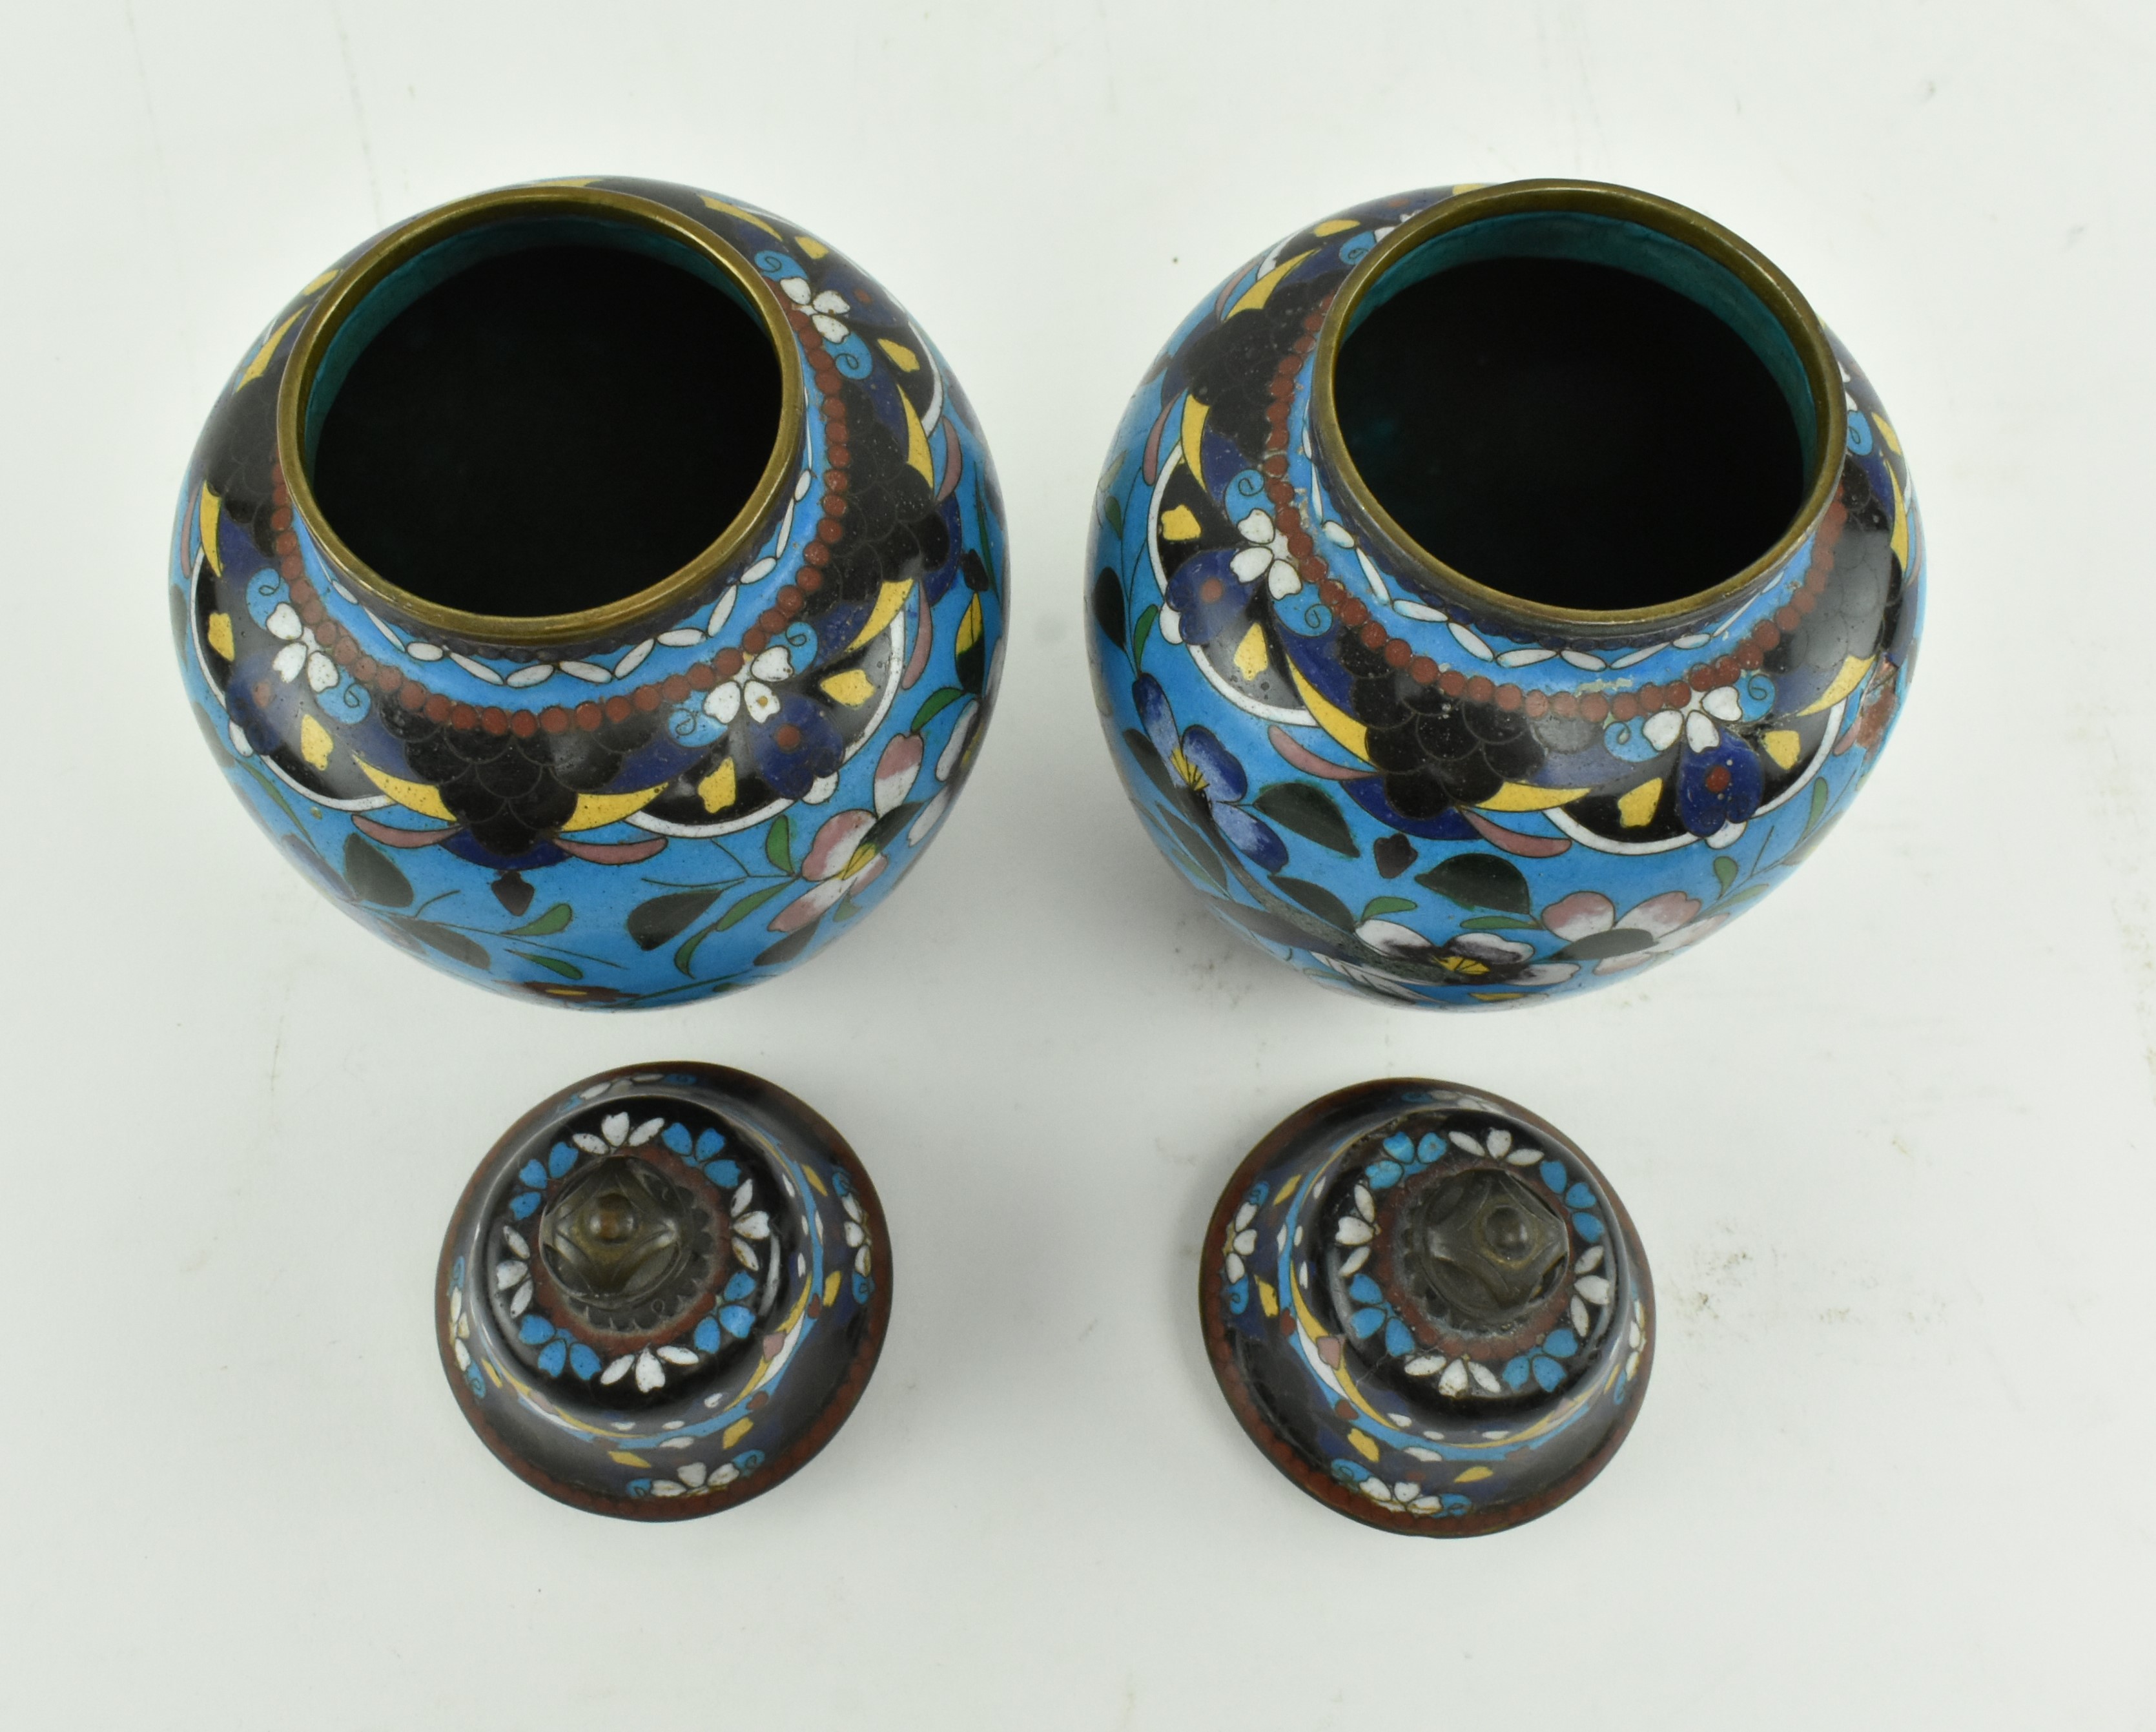 PAIR OF JAPANESE MEIJI PERIOD CLOISONNE JARS WITH COVER - Image 2 of 6